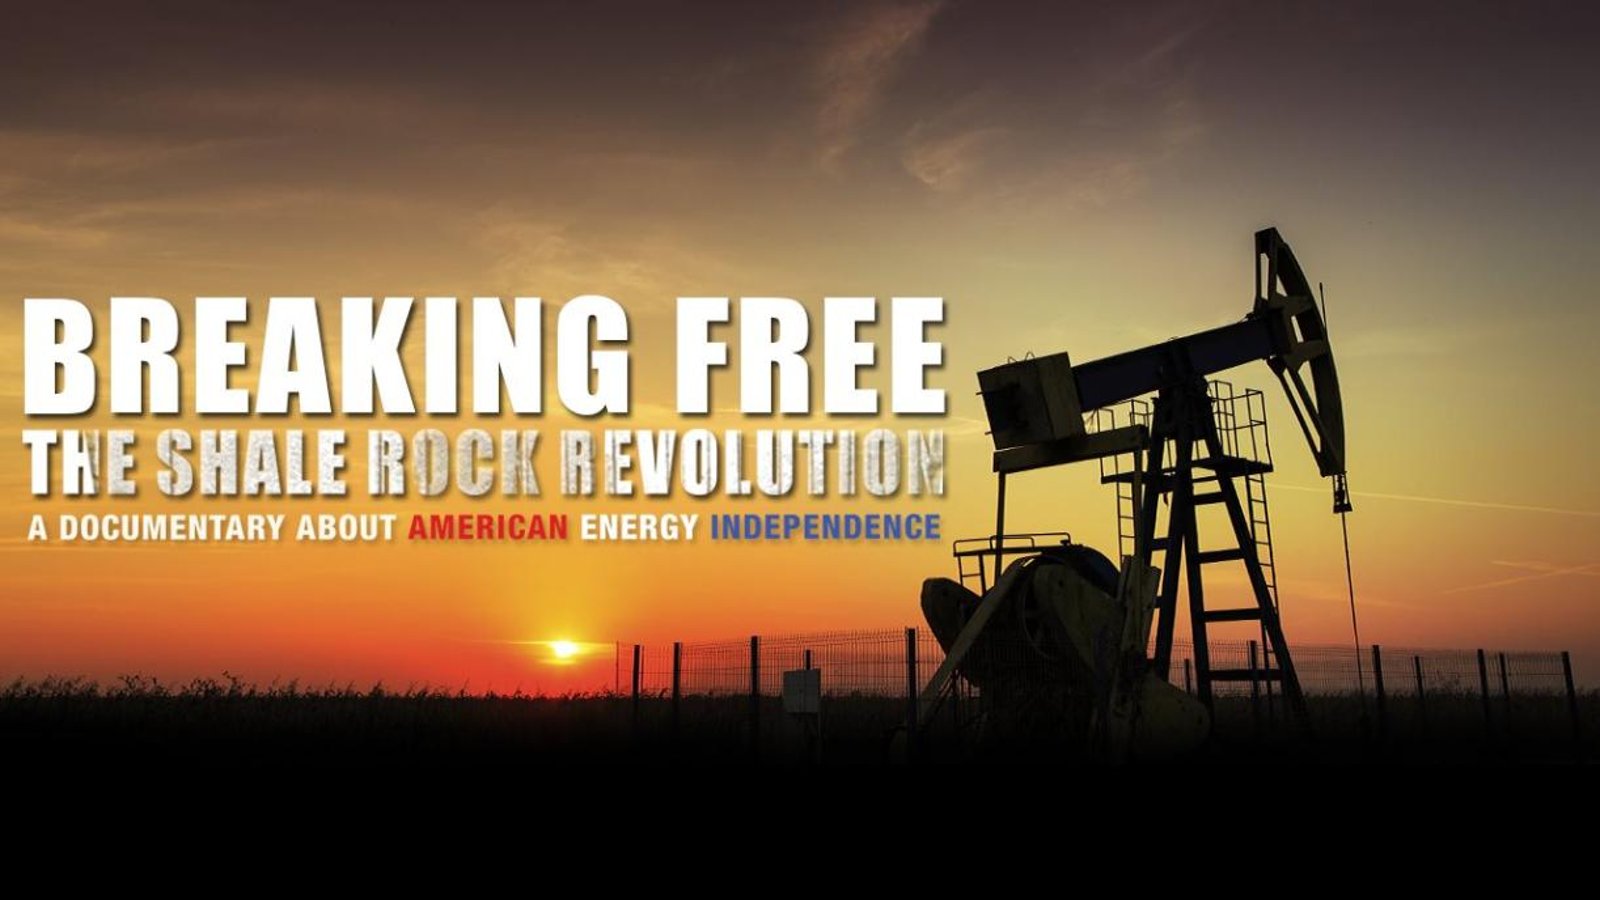 Breaking Free - A Documentary About American Energy Independence